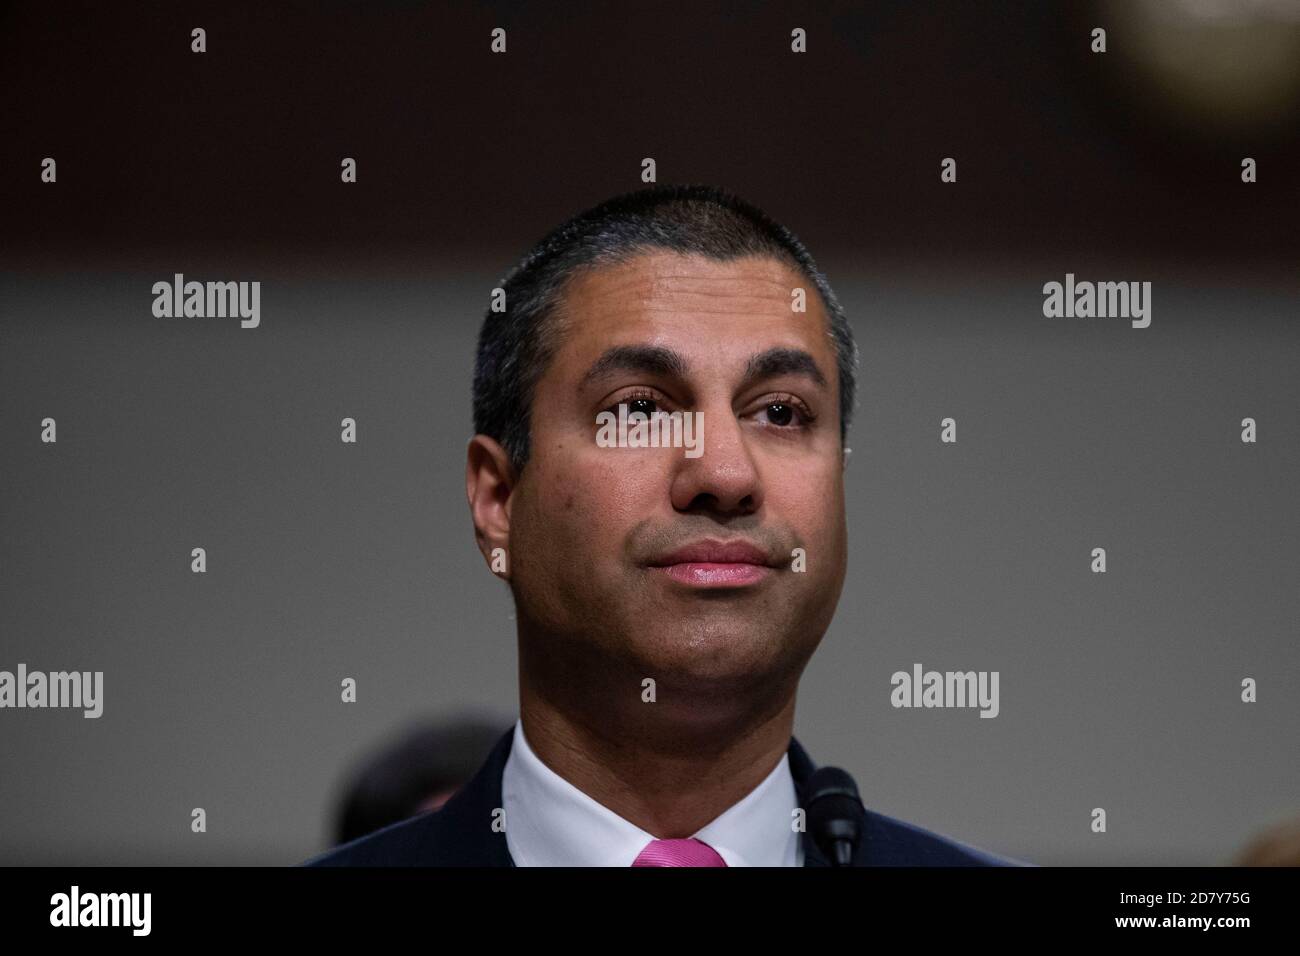 Ajit Pai, FCC Chairman, testifies before the Senate Senate Commerce, Science And Transportation Committee during an FCC oversight hearing on Capitol Hill in Washington, D.C. on June 12, 2019. Pai answered questions from lawmakers on a wide range of communications topics. Credit: Alex Edelman/The Photo Access Stock Photo